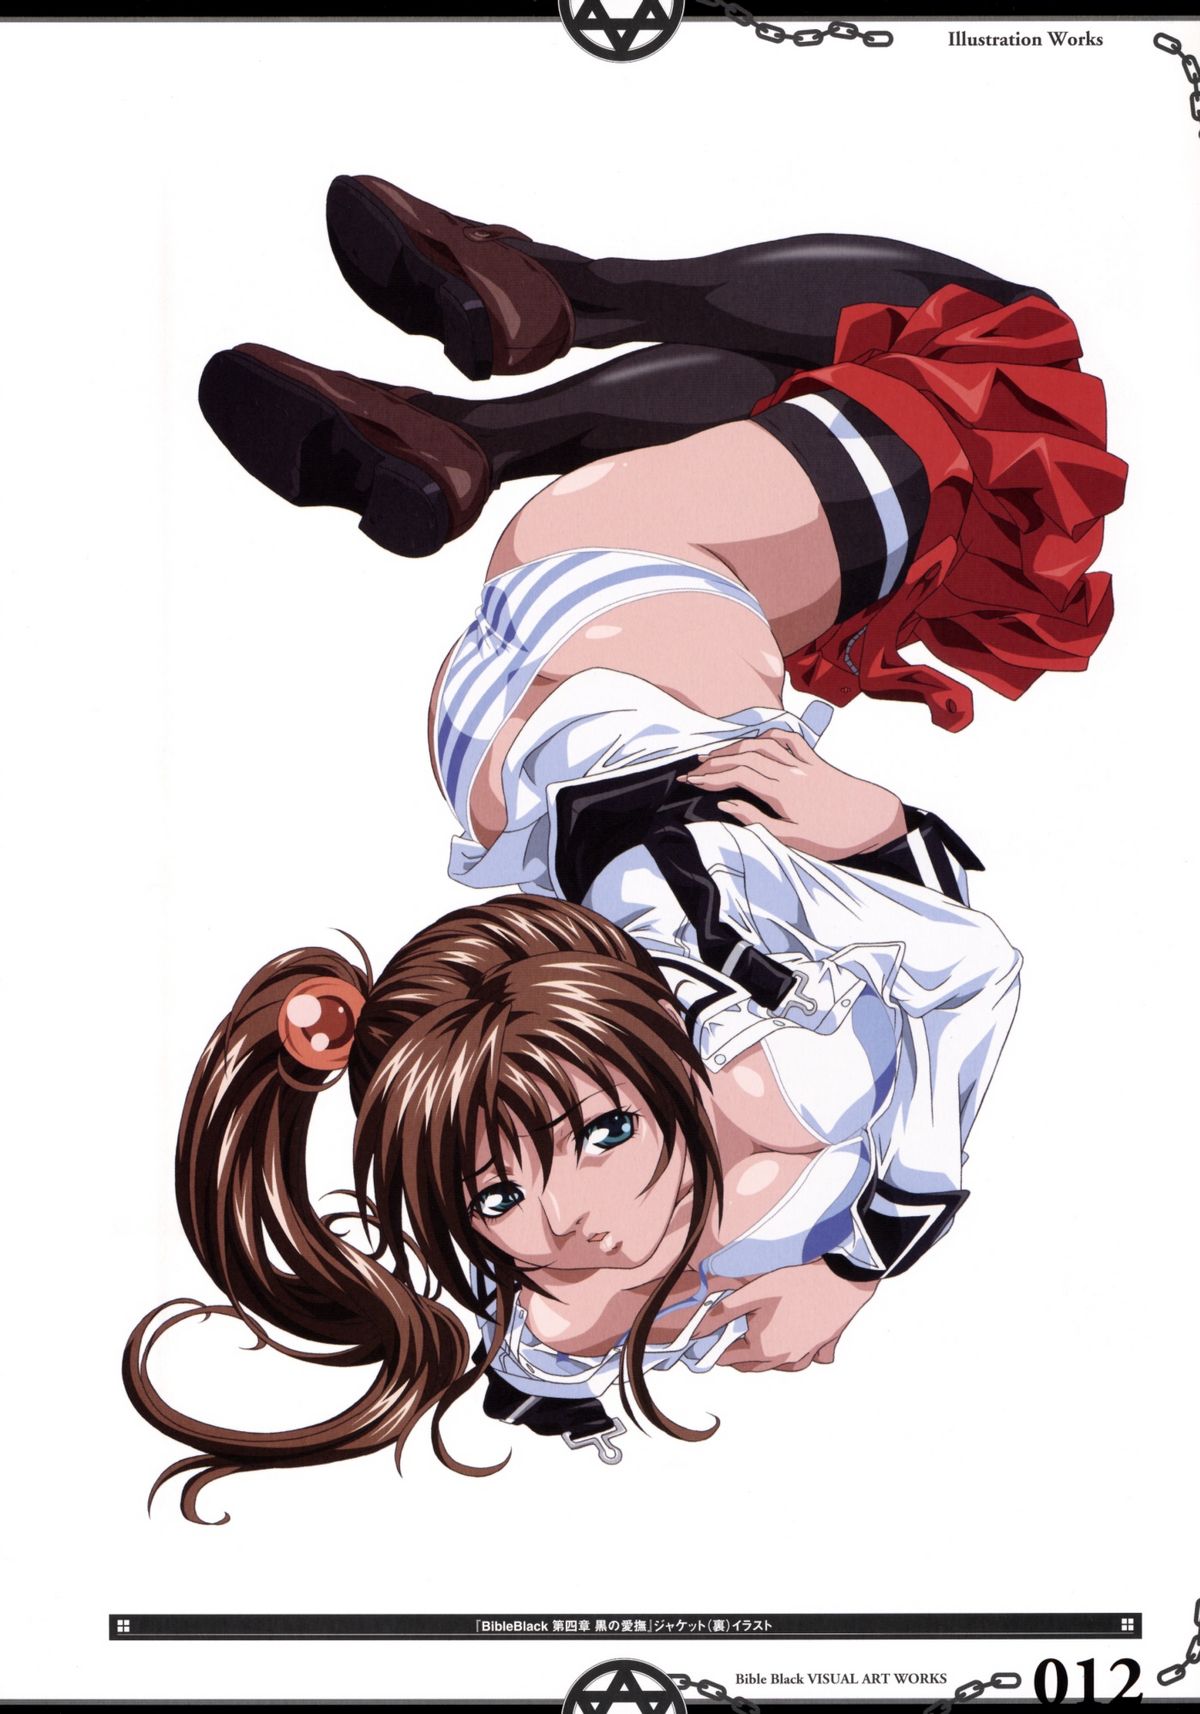 The Bible Black Visual Art Works page 19 full